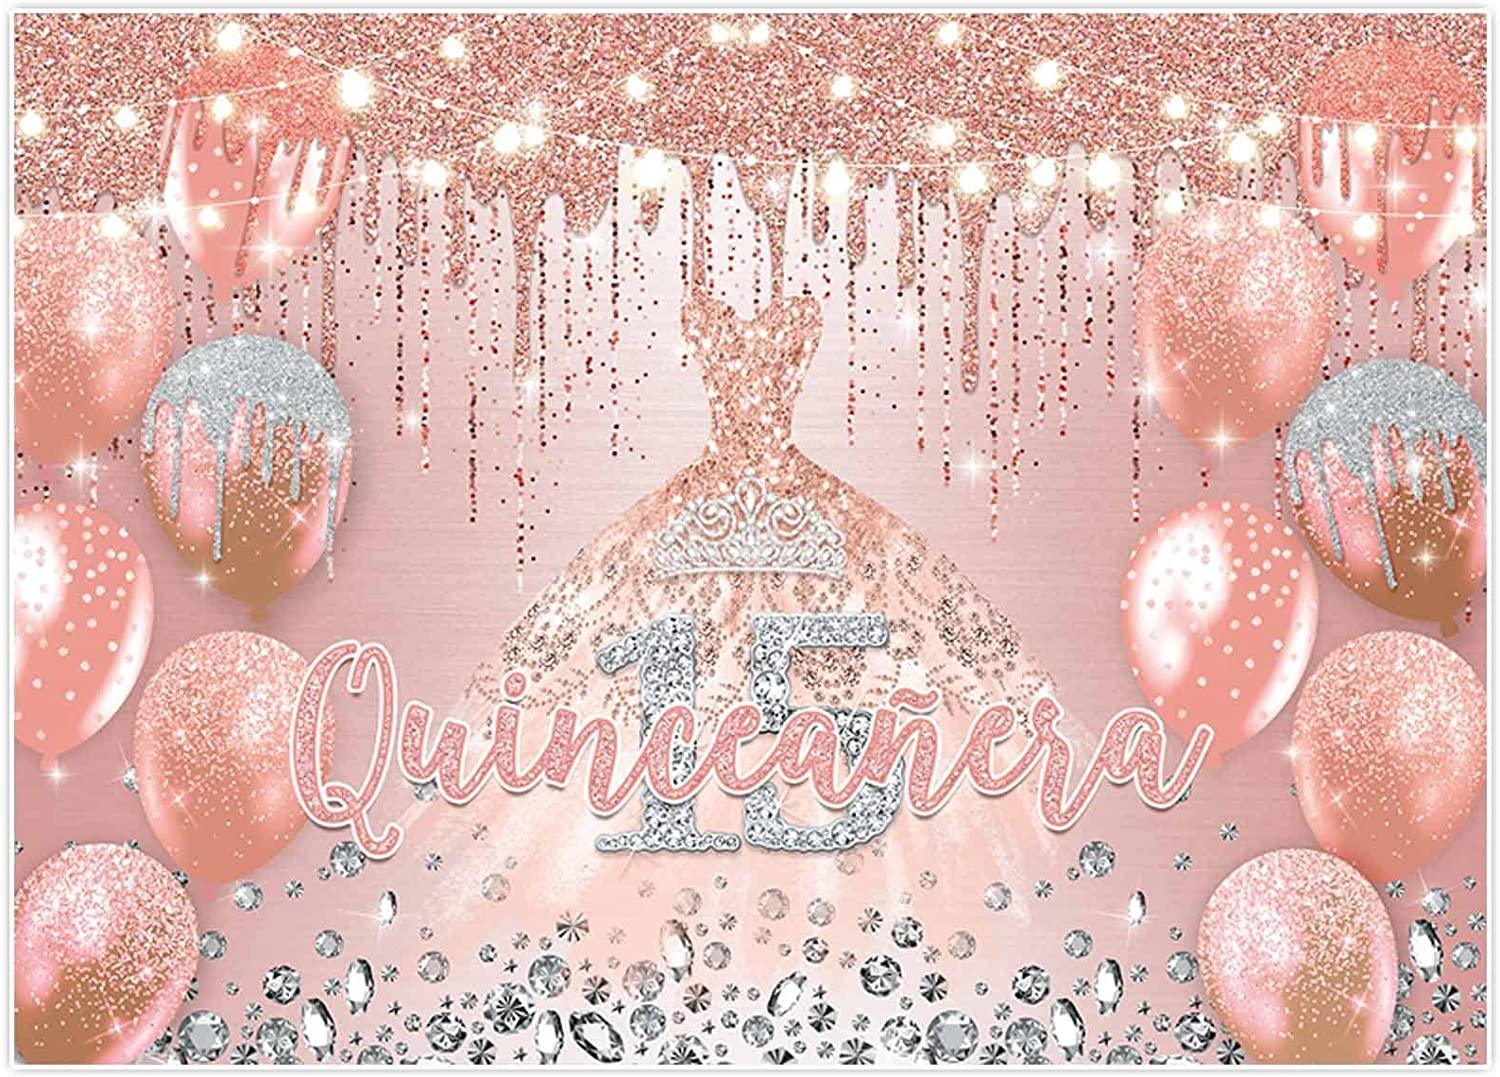 Rose Gold Quinceañera Birthday Backdrop for Girl Princess Happy 15th Bday Crown Mis Quince Años Balloons - If you say i do